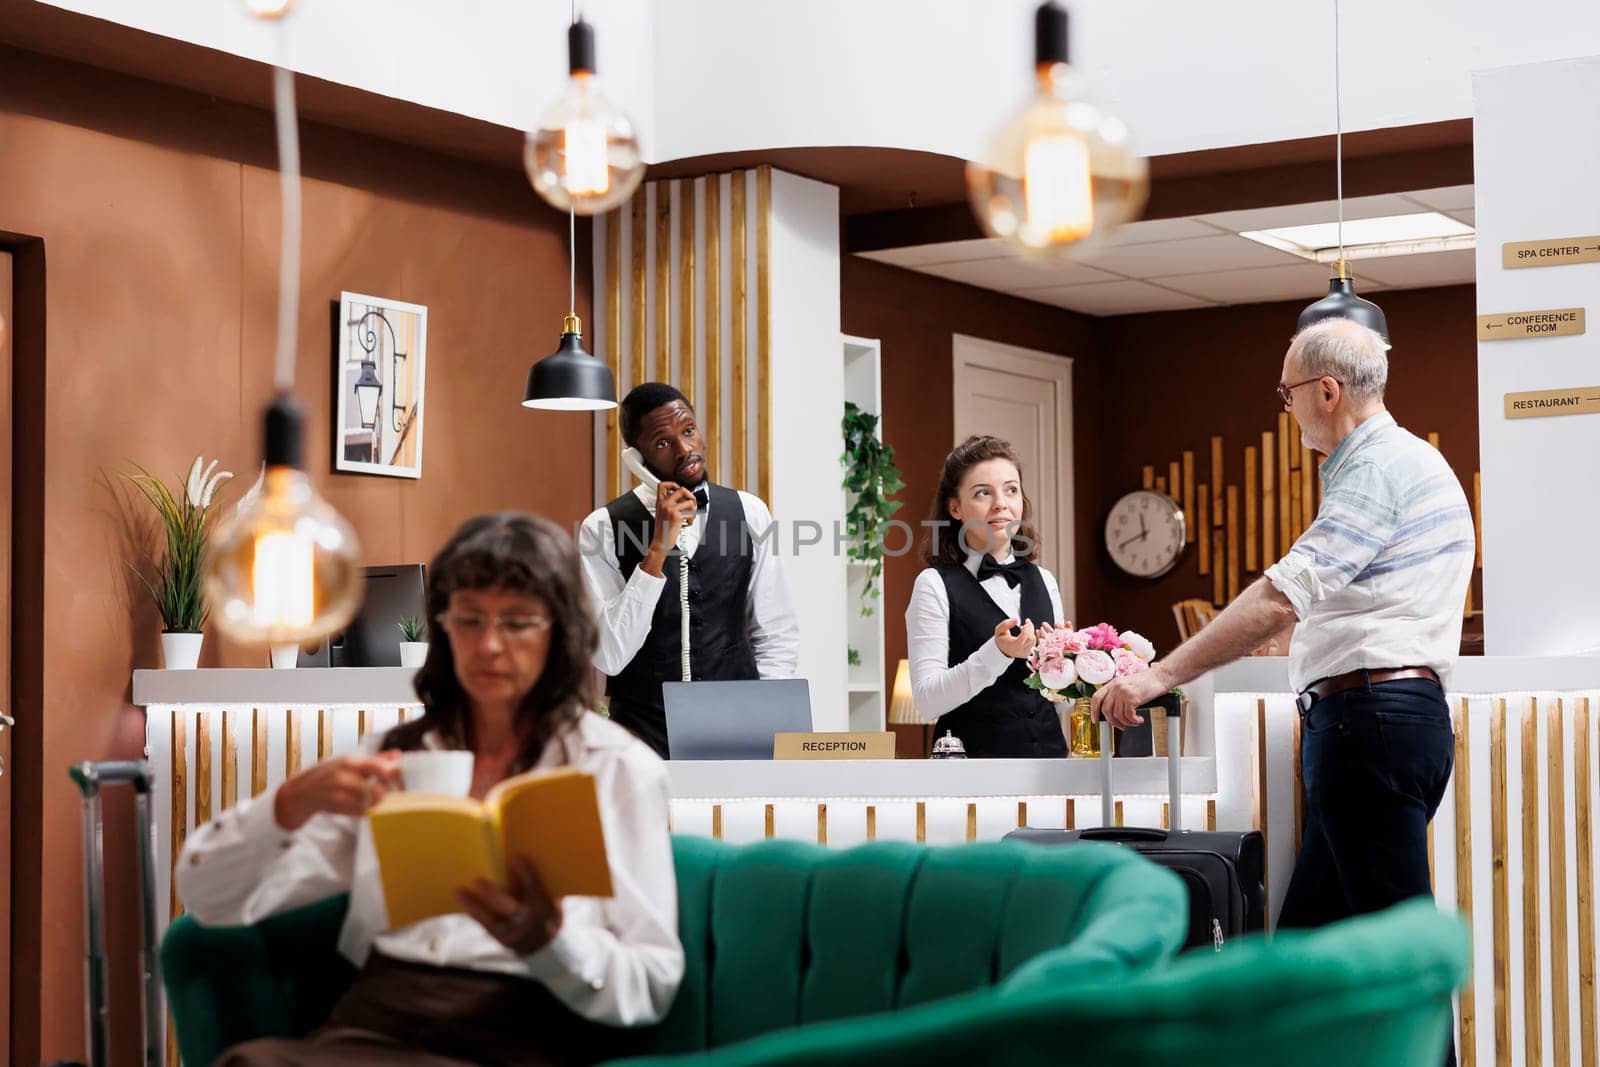 Friendly staff helps with hotel check-in by DCStudio